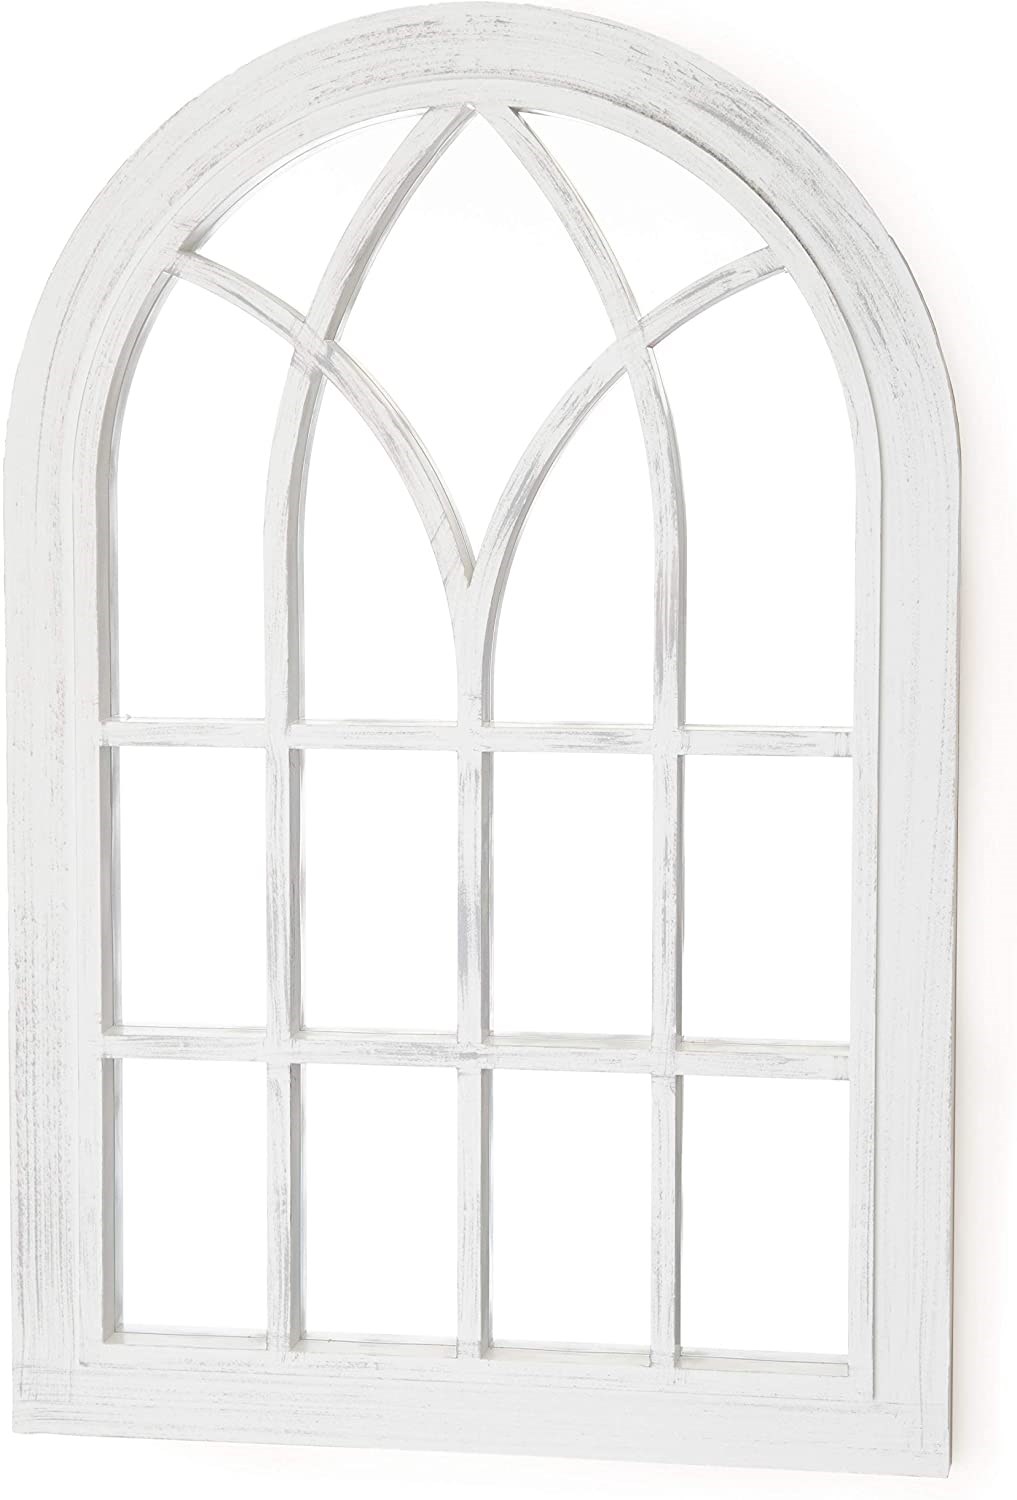 2ft 6in x 1ft 8in Toscana Garden Wall Mirror by Creekwood™